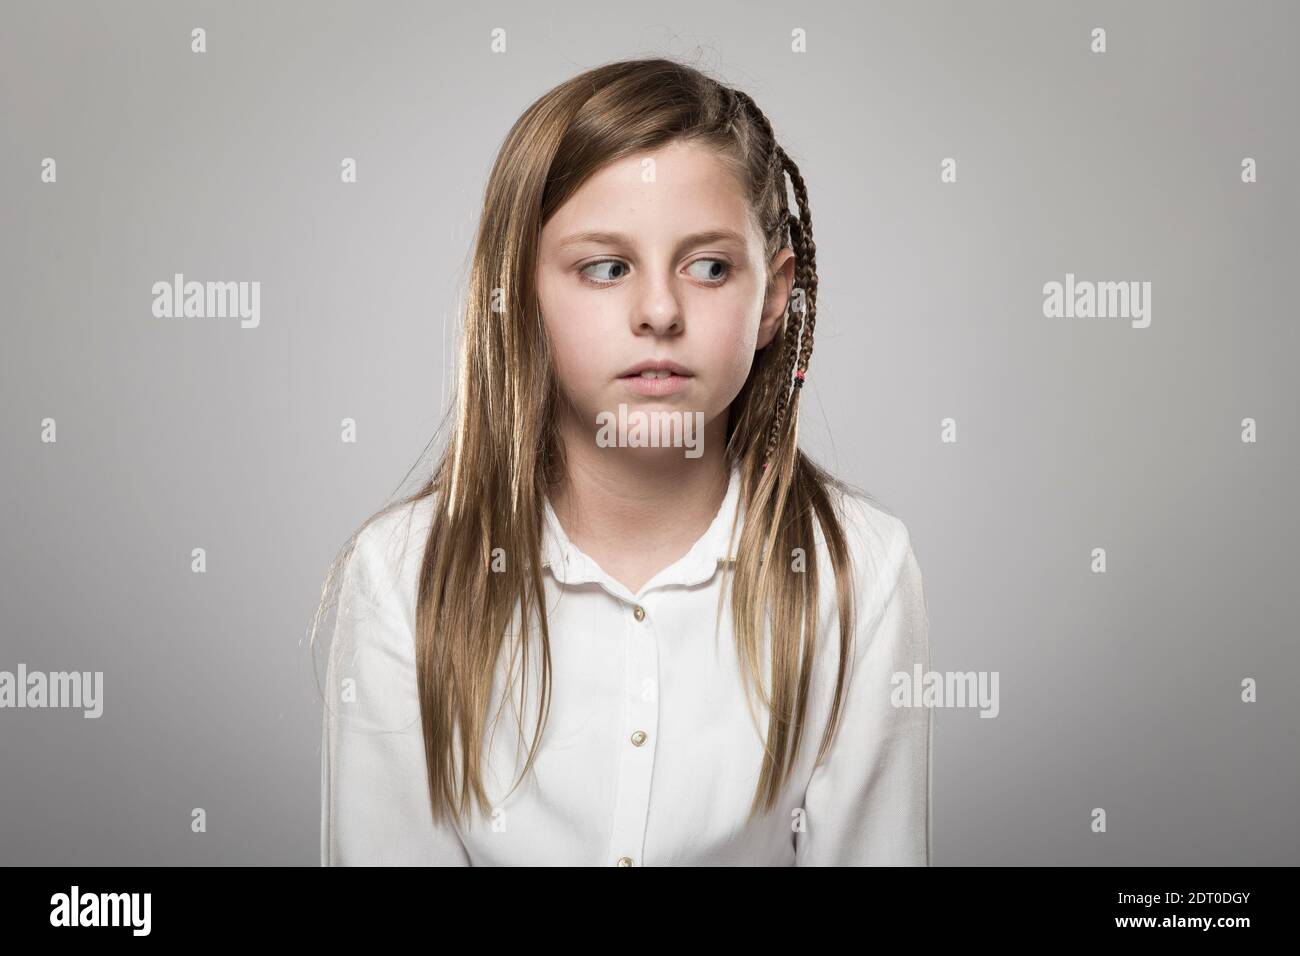 Studio portrait of a cute girl with long blonde hair looking askance against neutral background Stock Photo